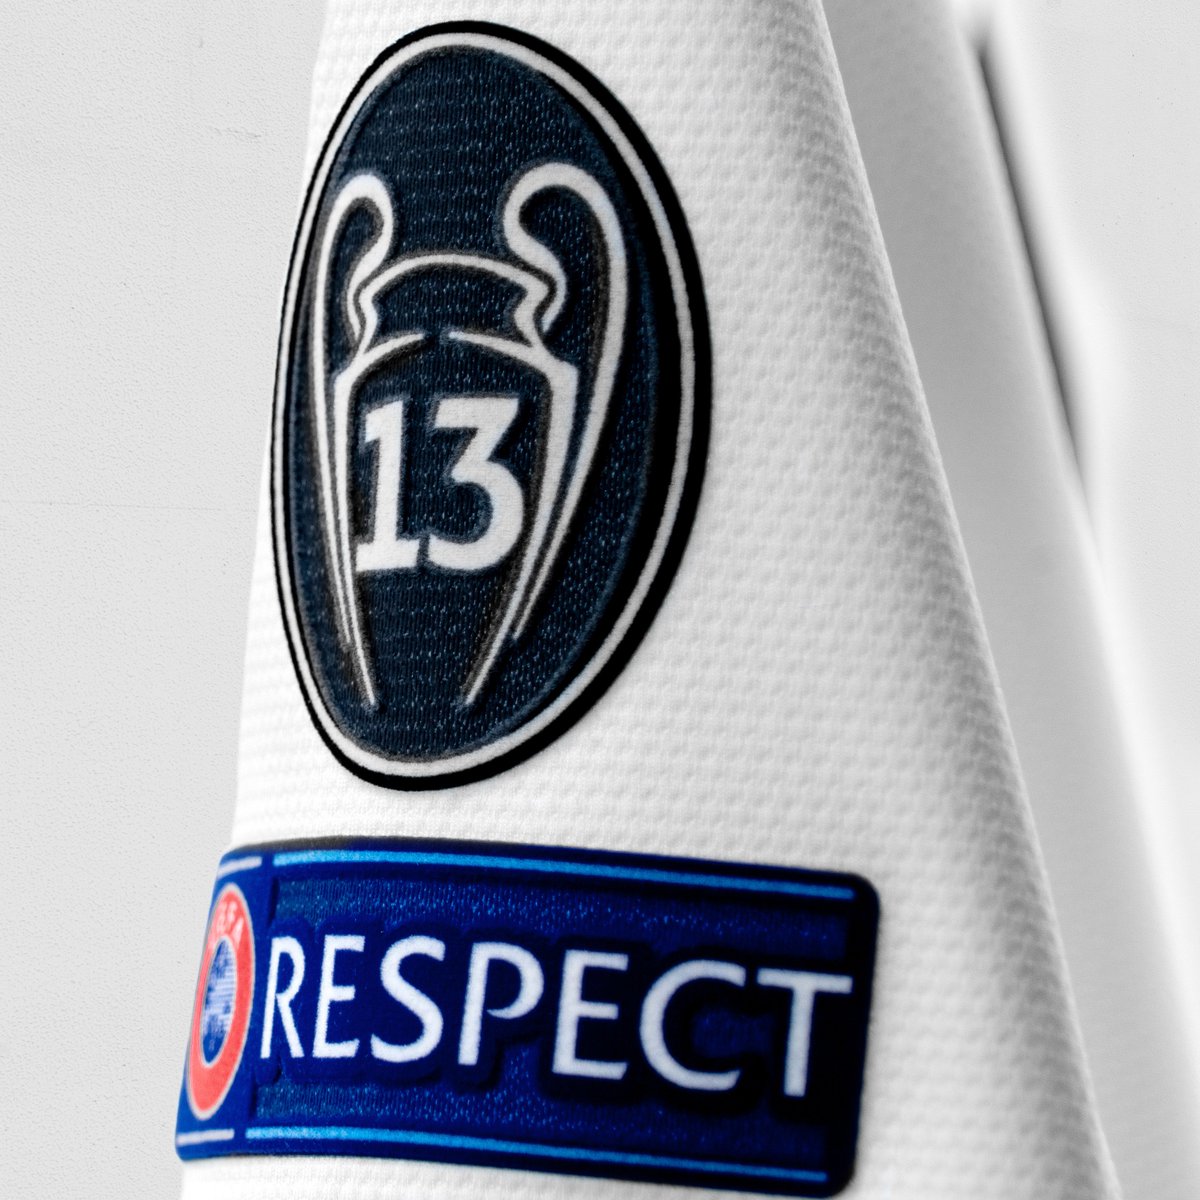 Europe Patch badge Champion's League 2018 maillot de foot Real Madrid 2018/2019 